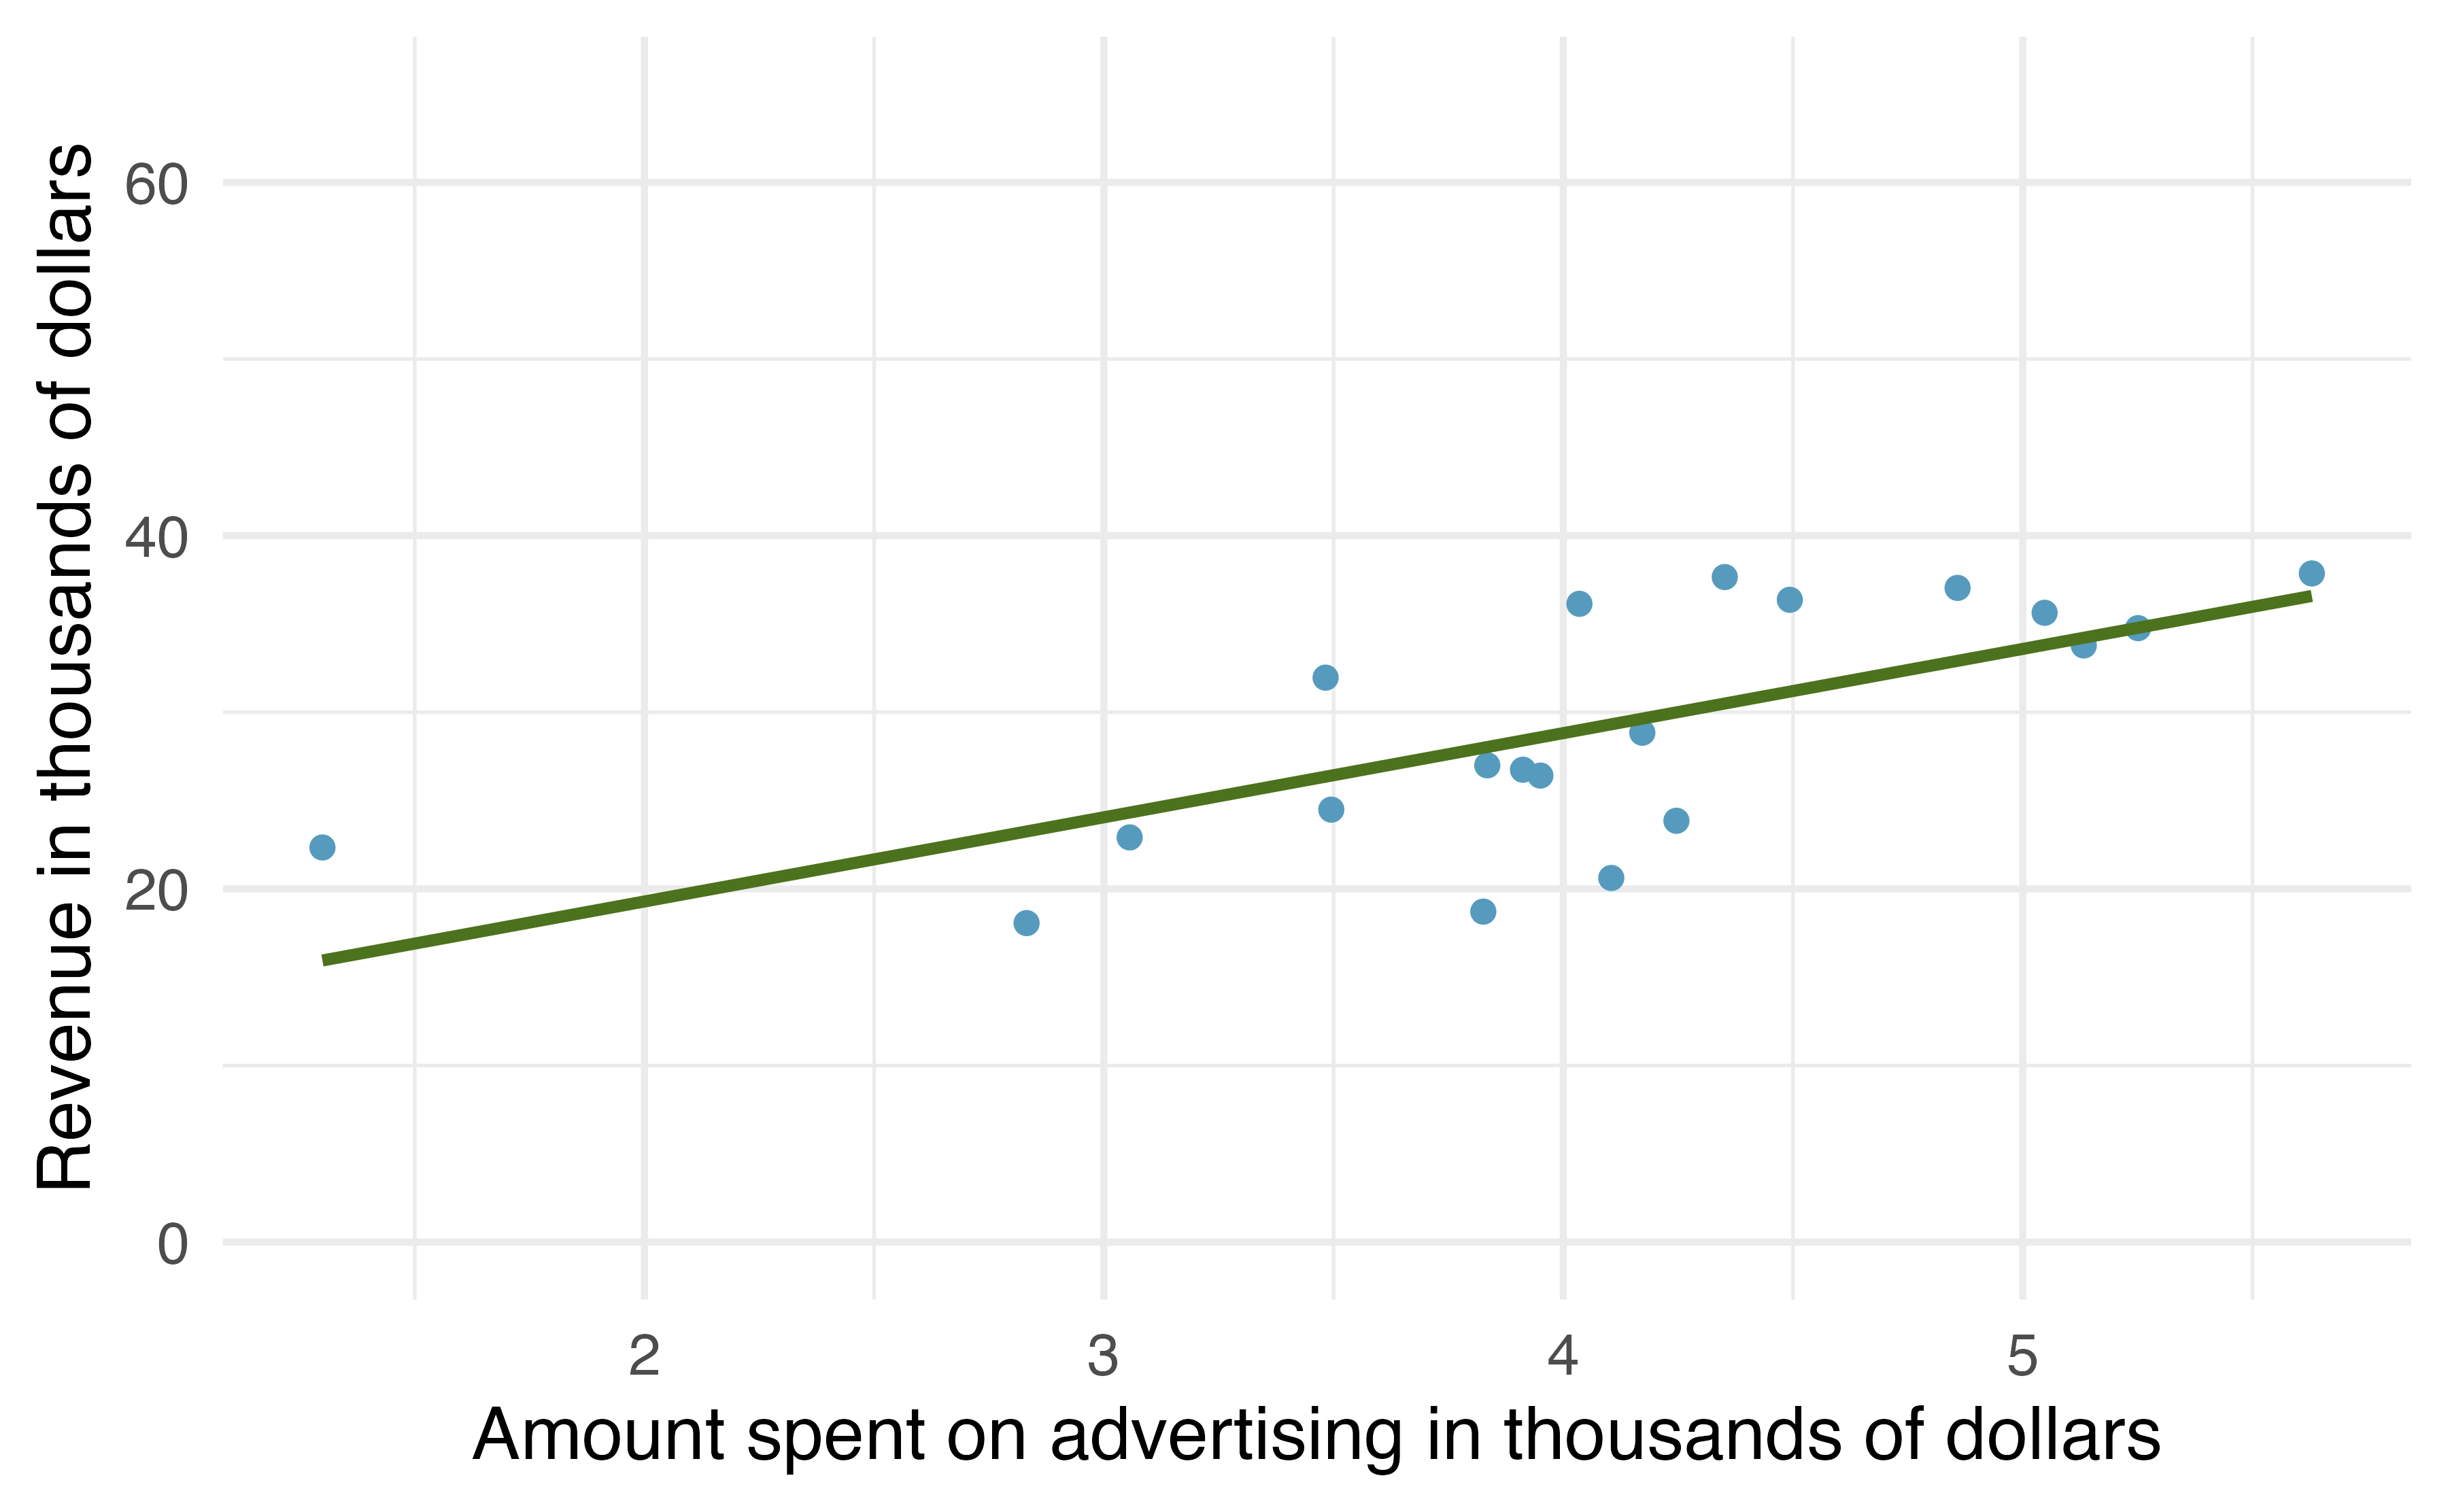 A different random sample of 20 stores from the entire population. Again, a positive linear trend between advertising and revenue is observed.